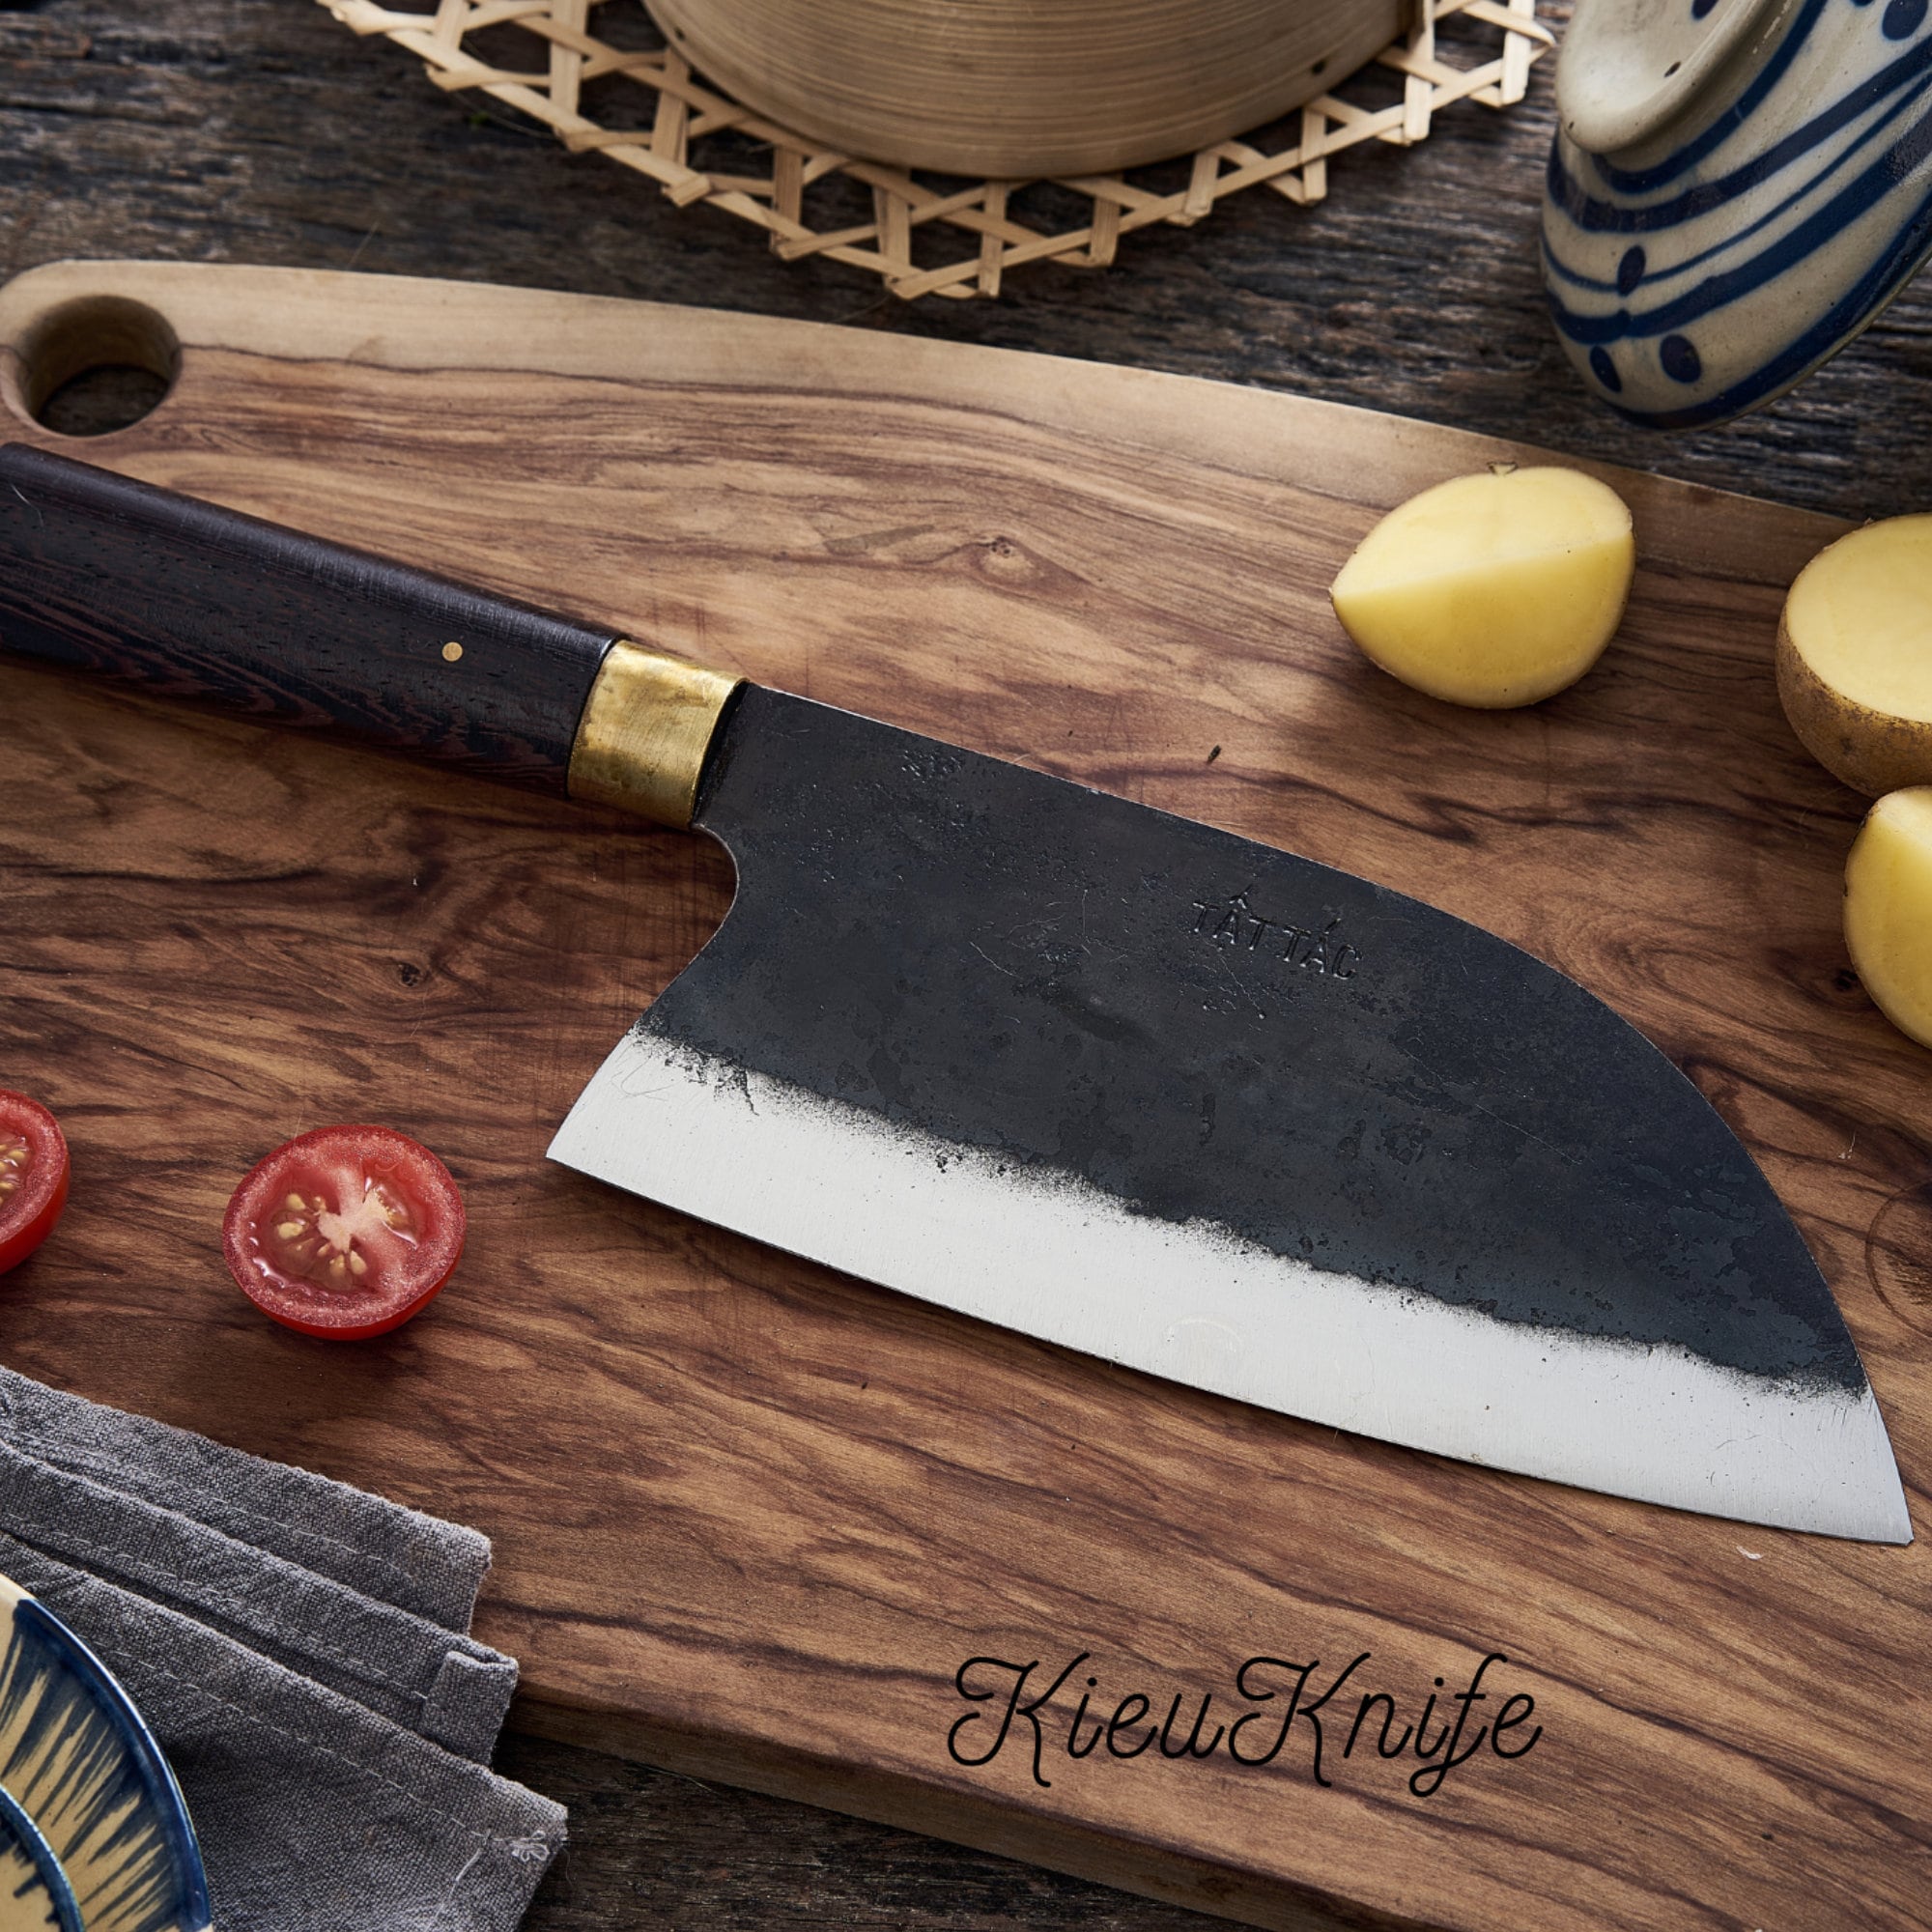 KOTAI Cleaver (Chinese Chef's Knife) - Pakka Collection - 190 mm blade